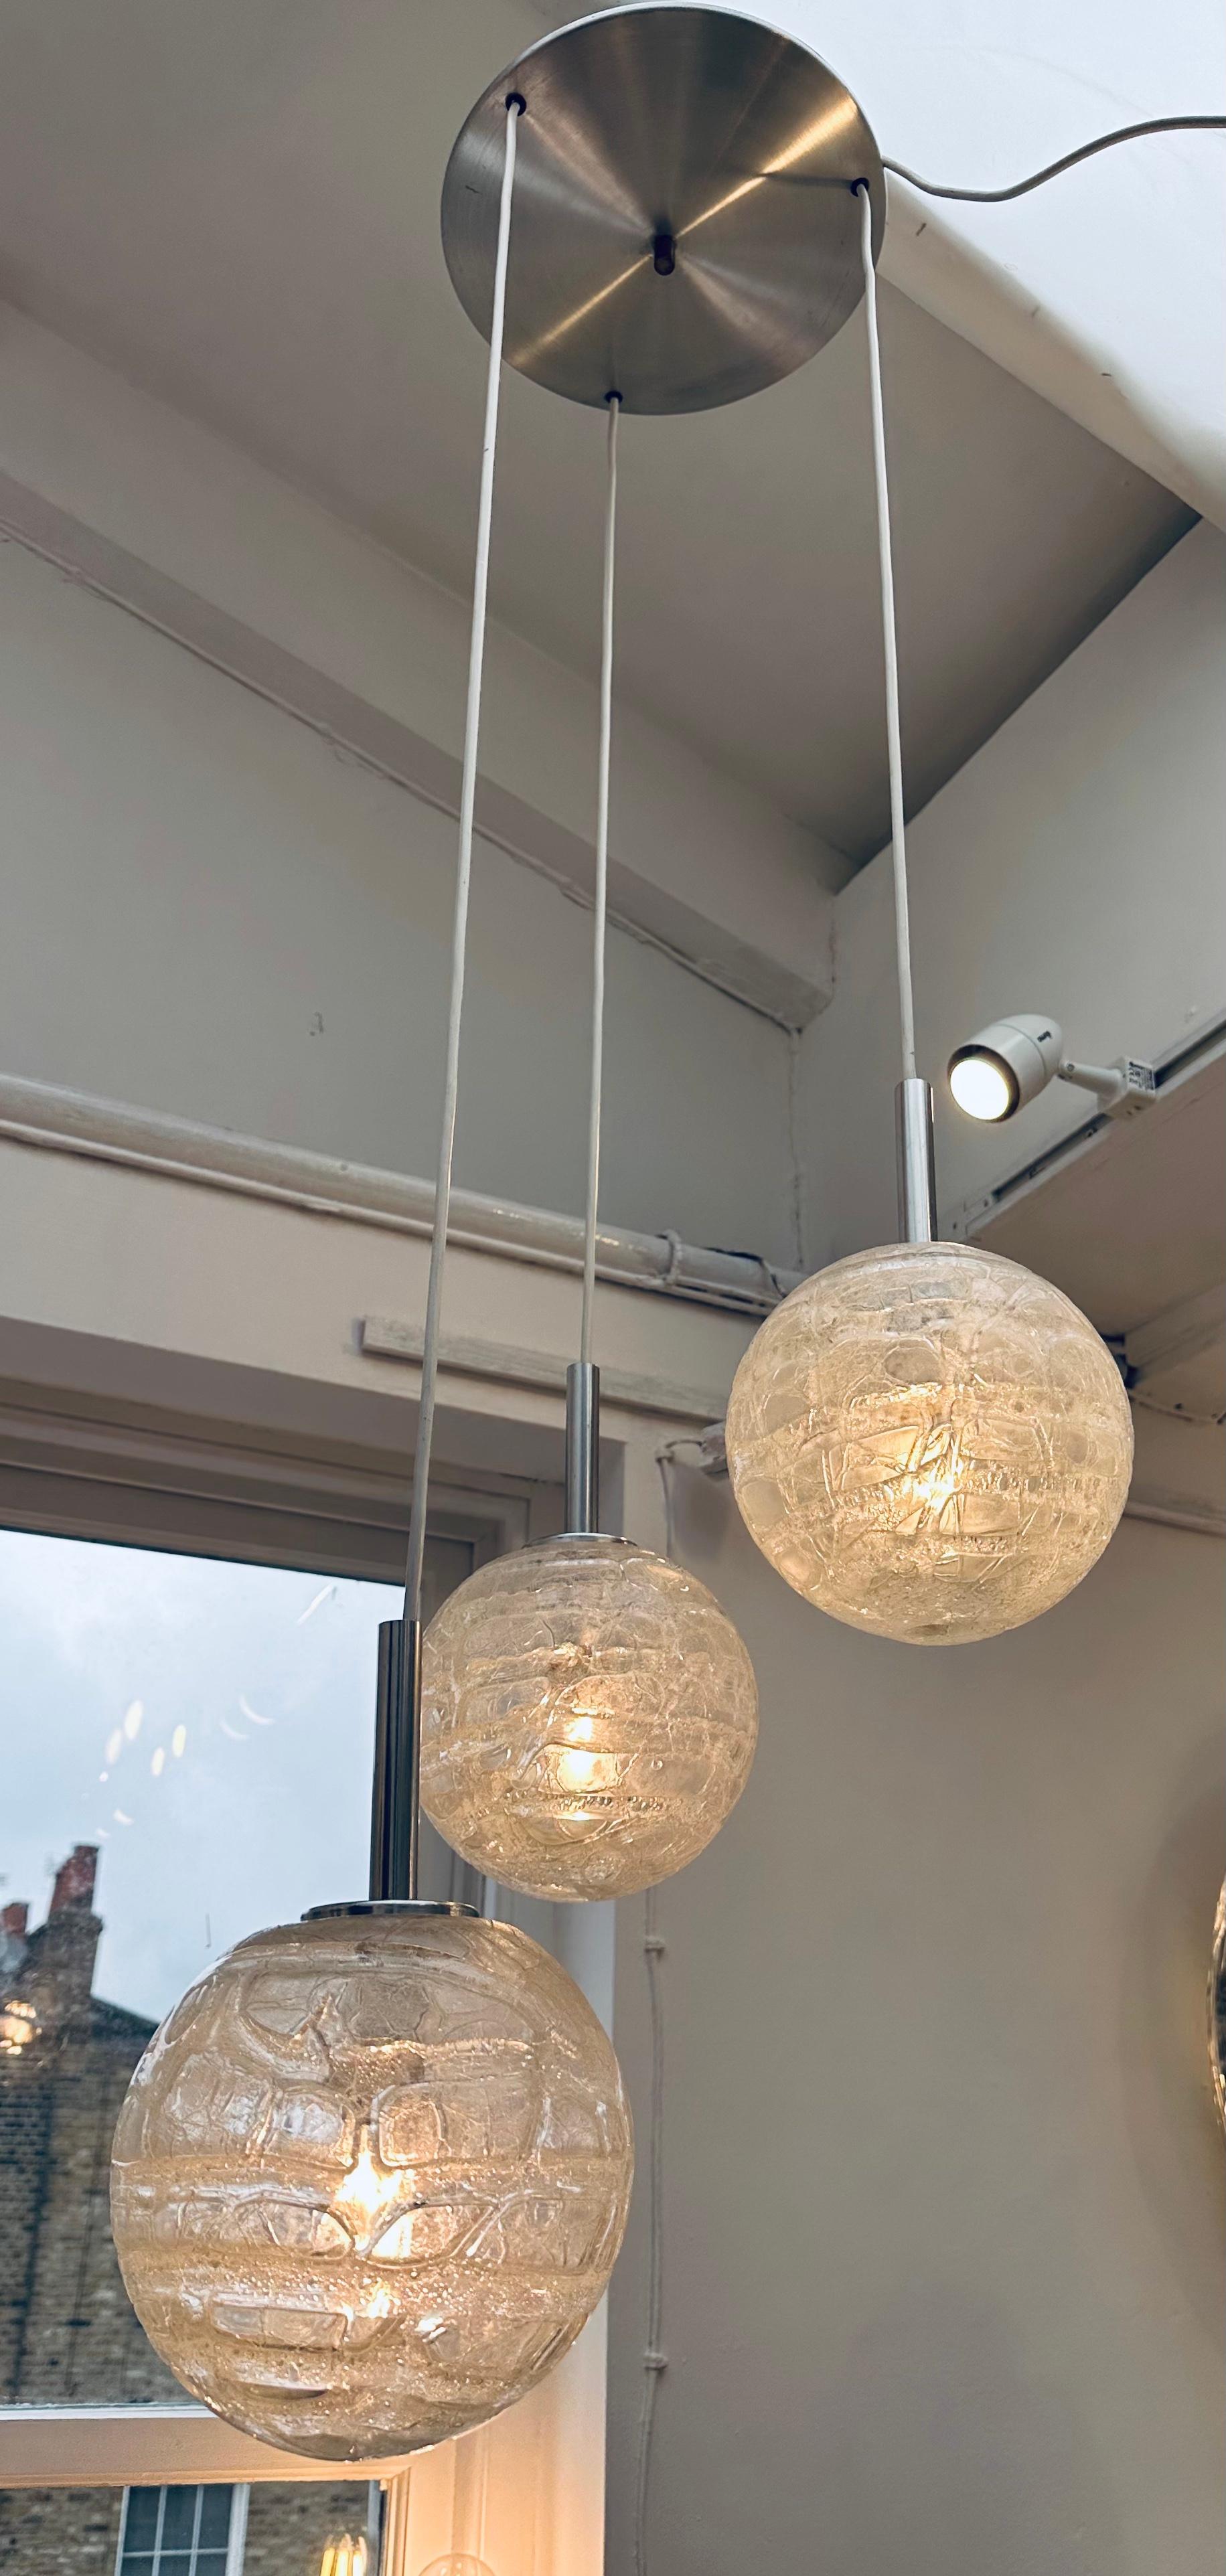 A triple globe crackled iced-glass suspended hanging light made in the 1970s by Doria Leuchten in Germany. The three equally sized cascading globe shades hang at different heights from white wires which all connect to a brushed chrome ceiling disc